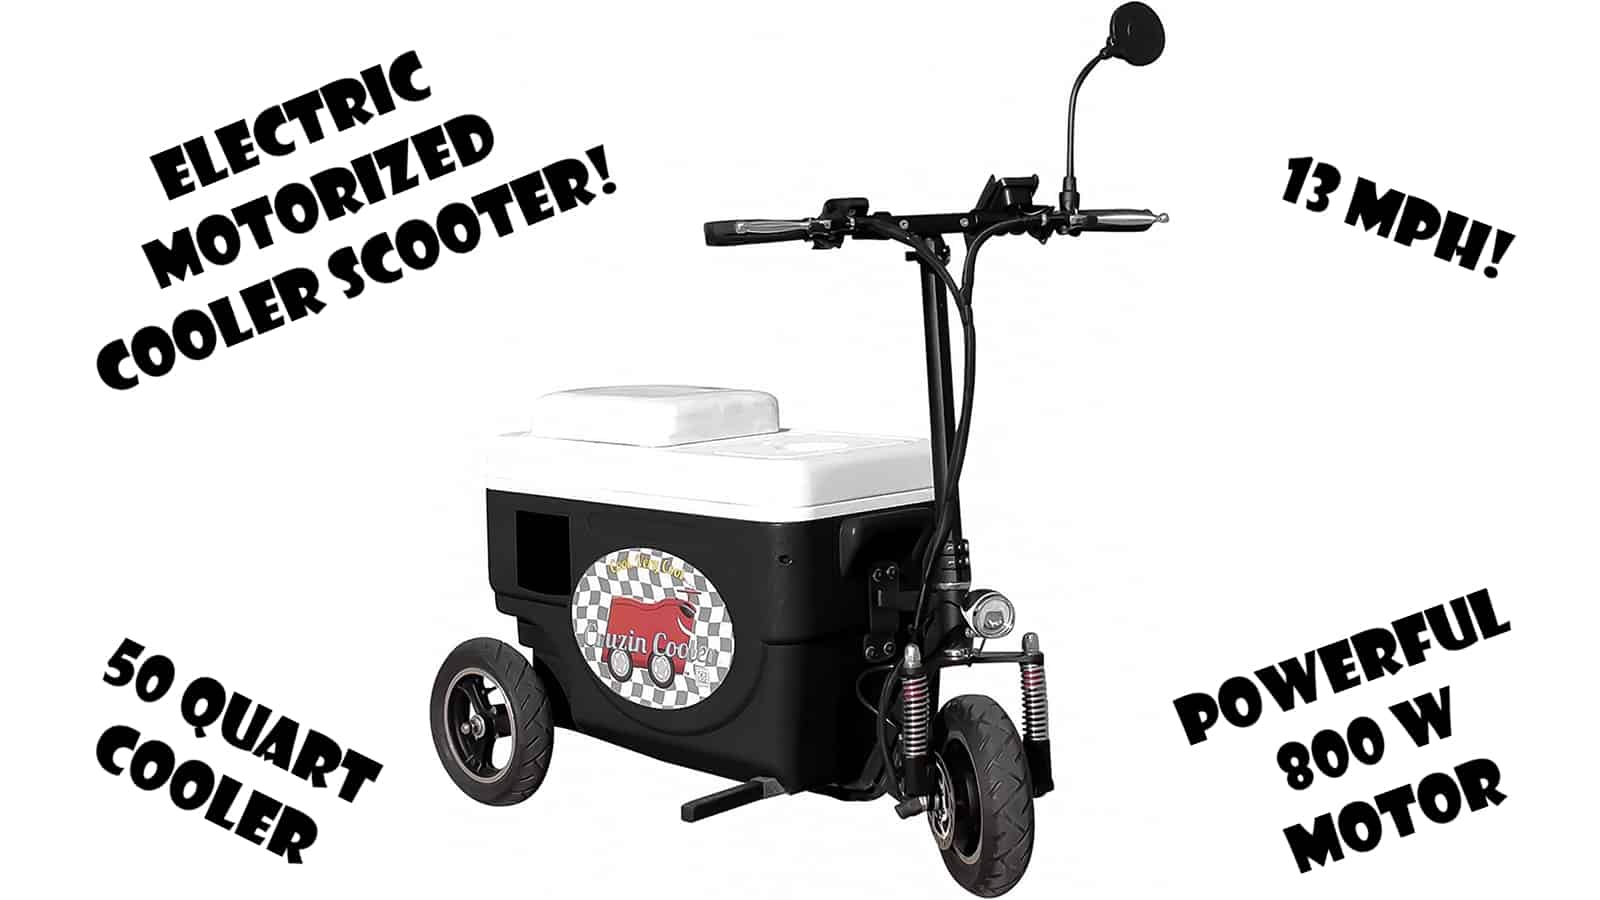 Electric motorized cooler scooter